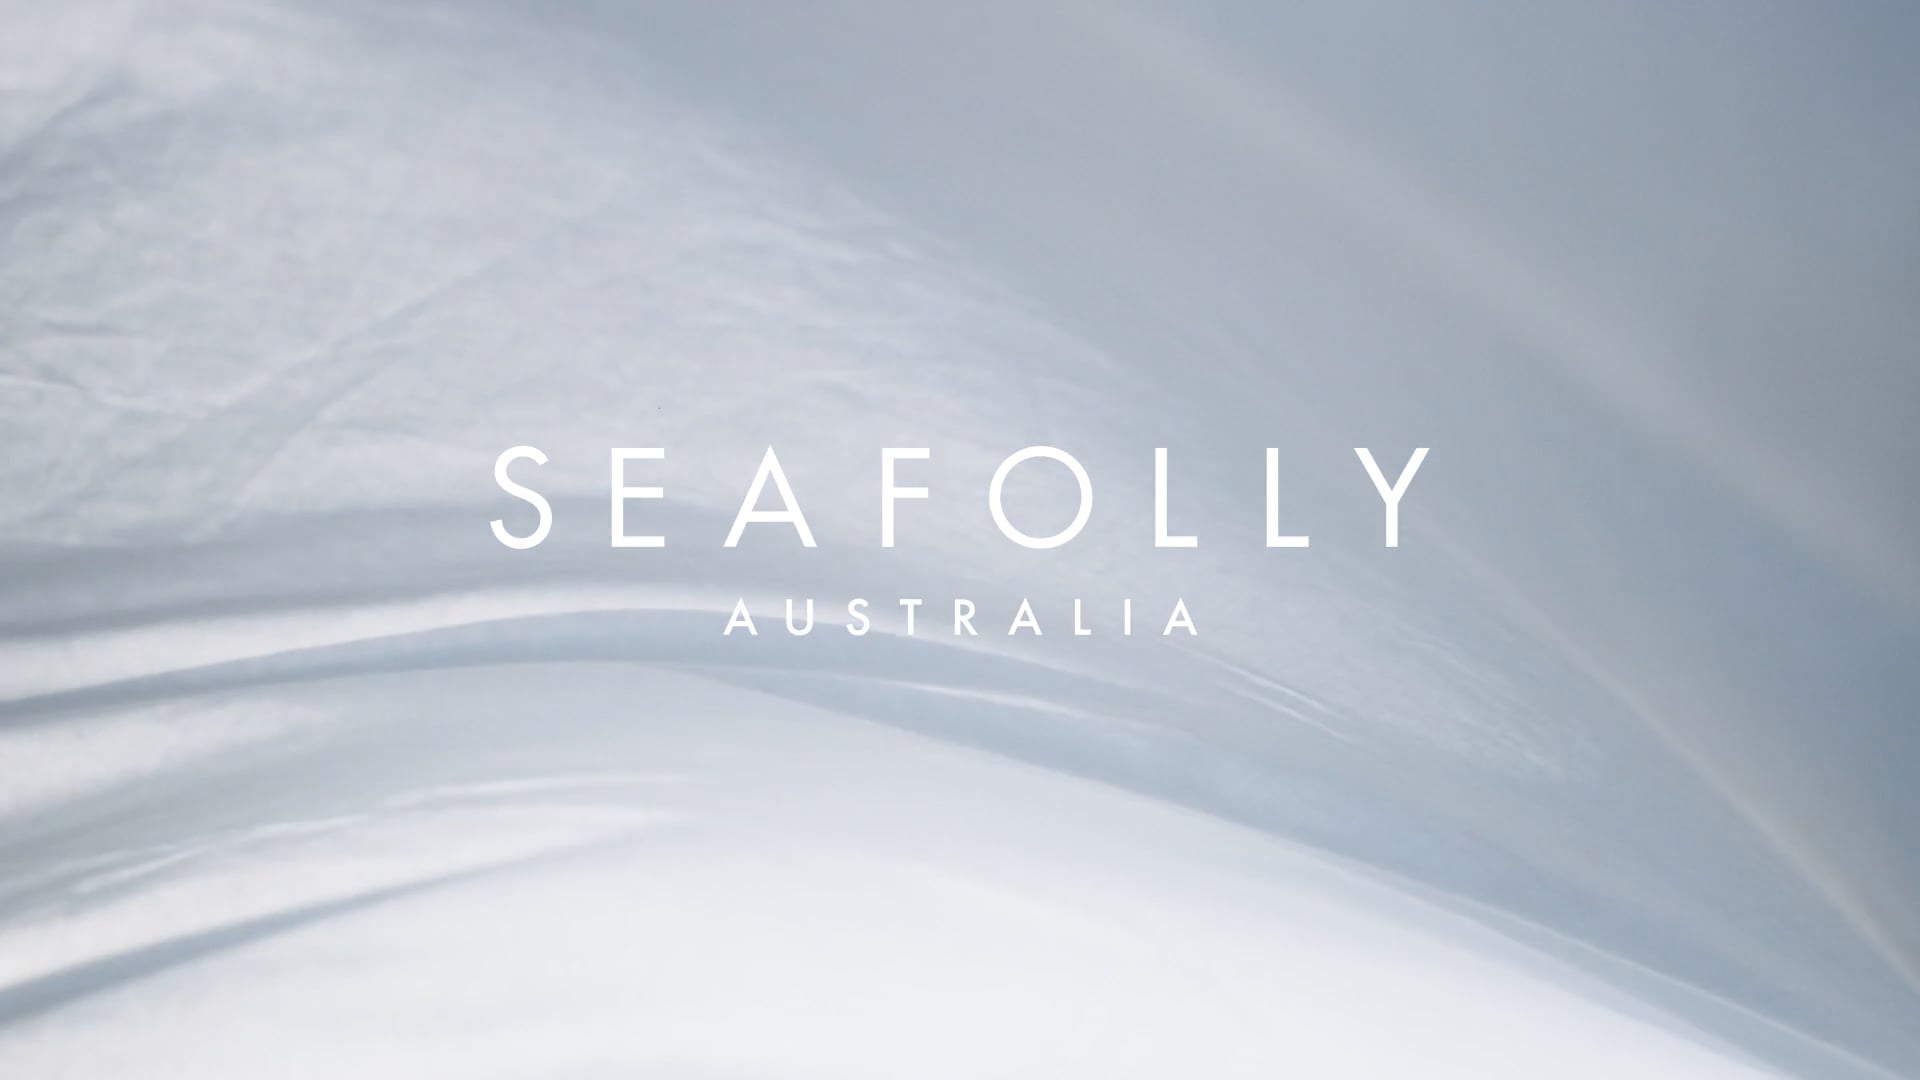 Seafolly - CORE COLLECTION Campaign